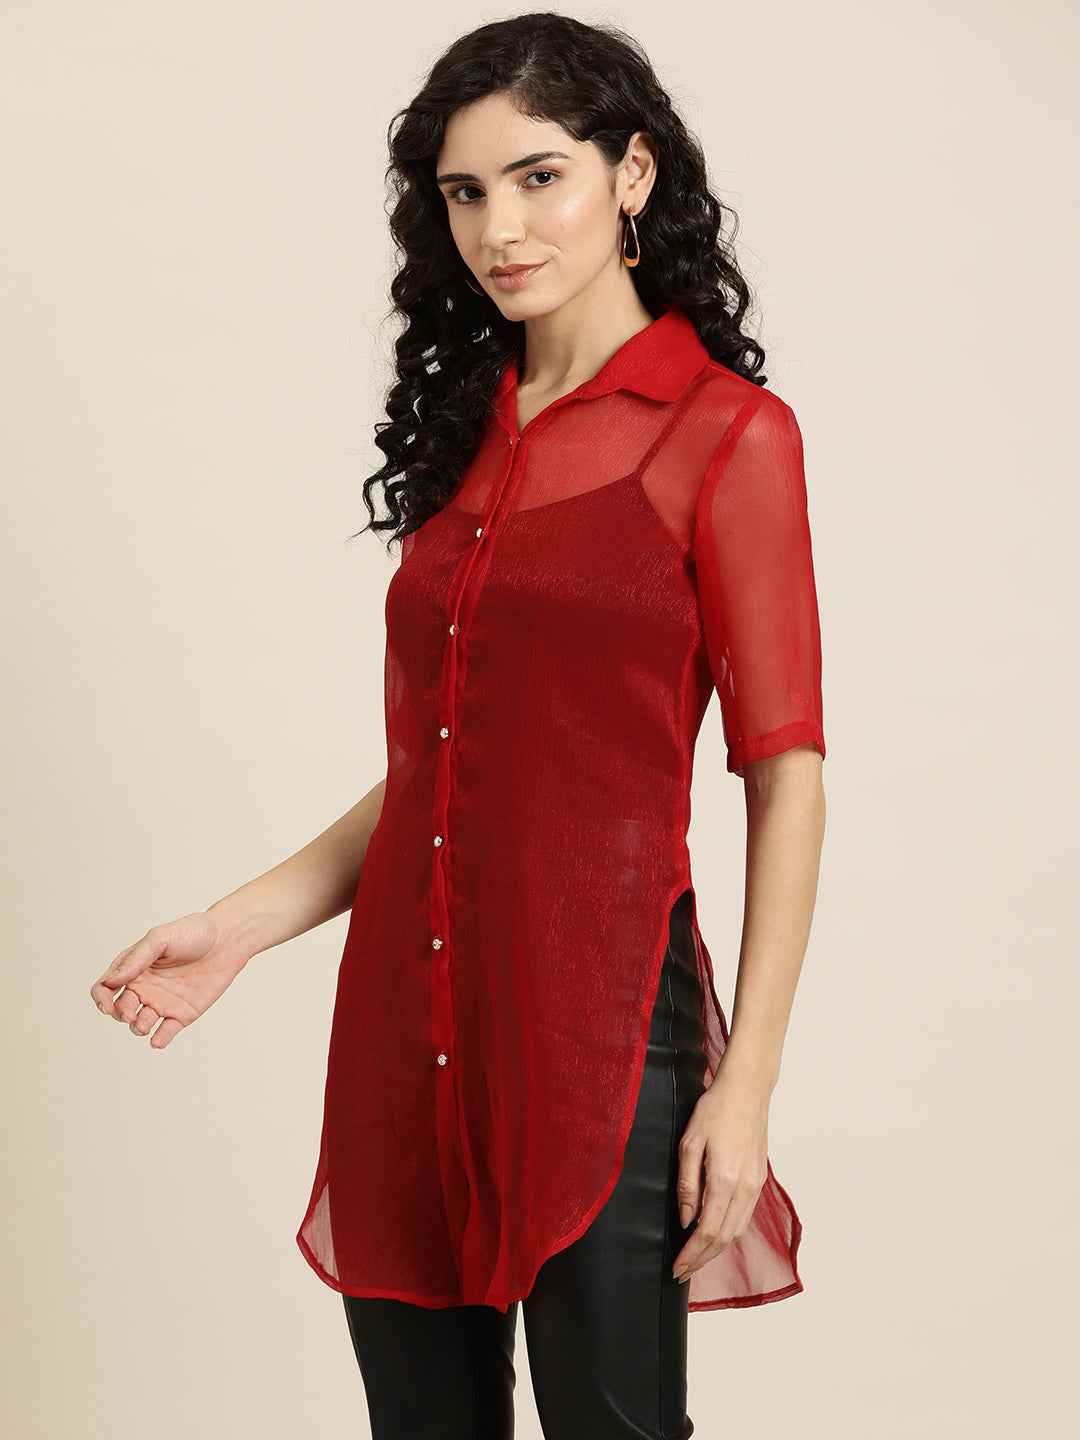 Red silk Party Shirt